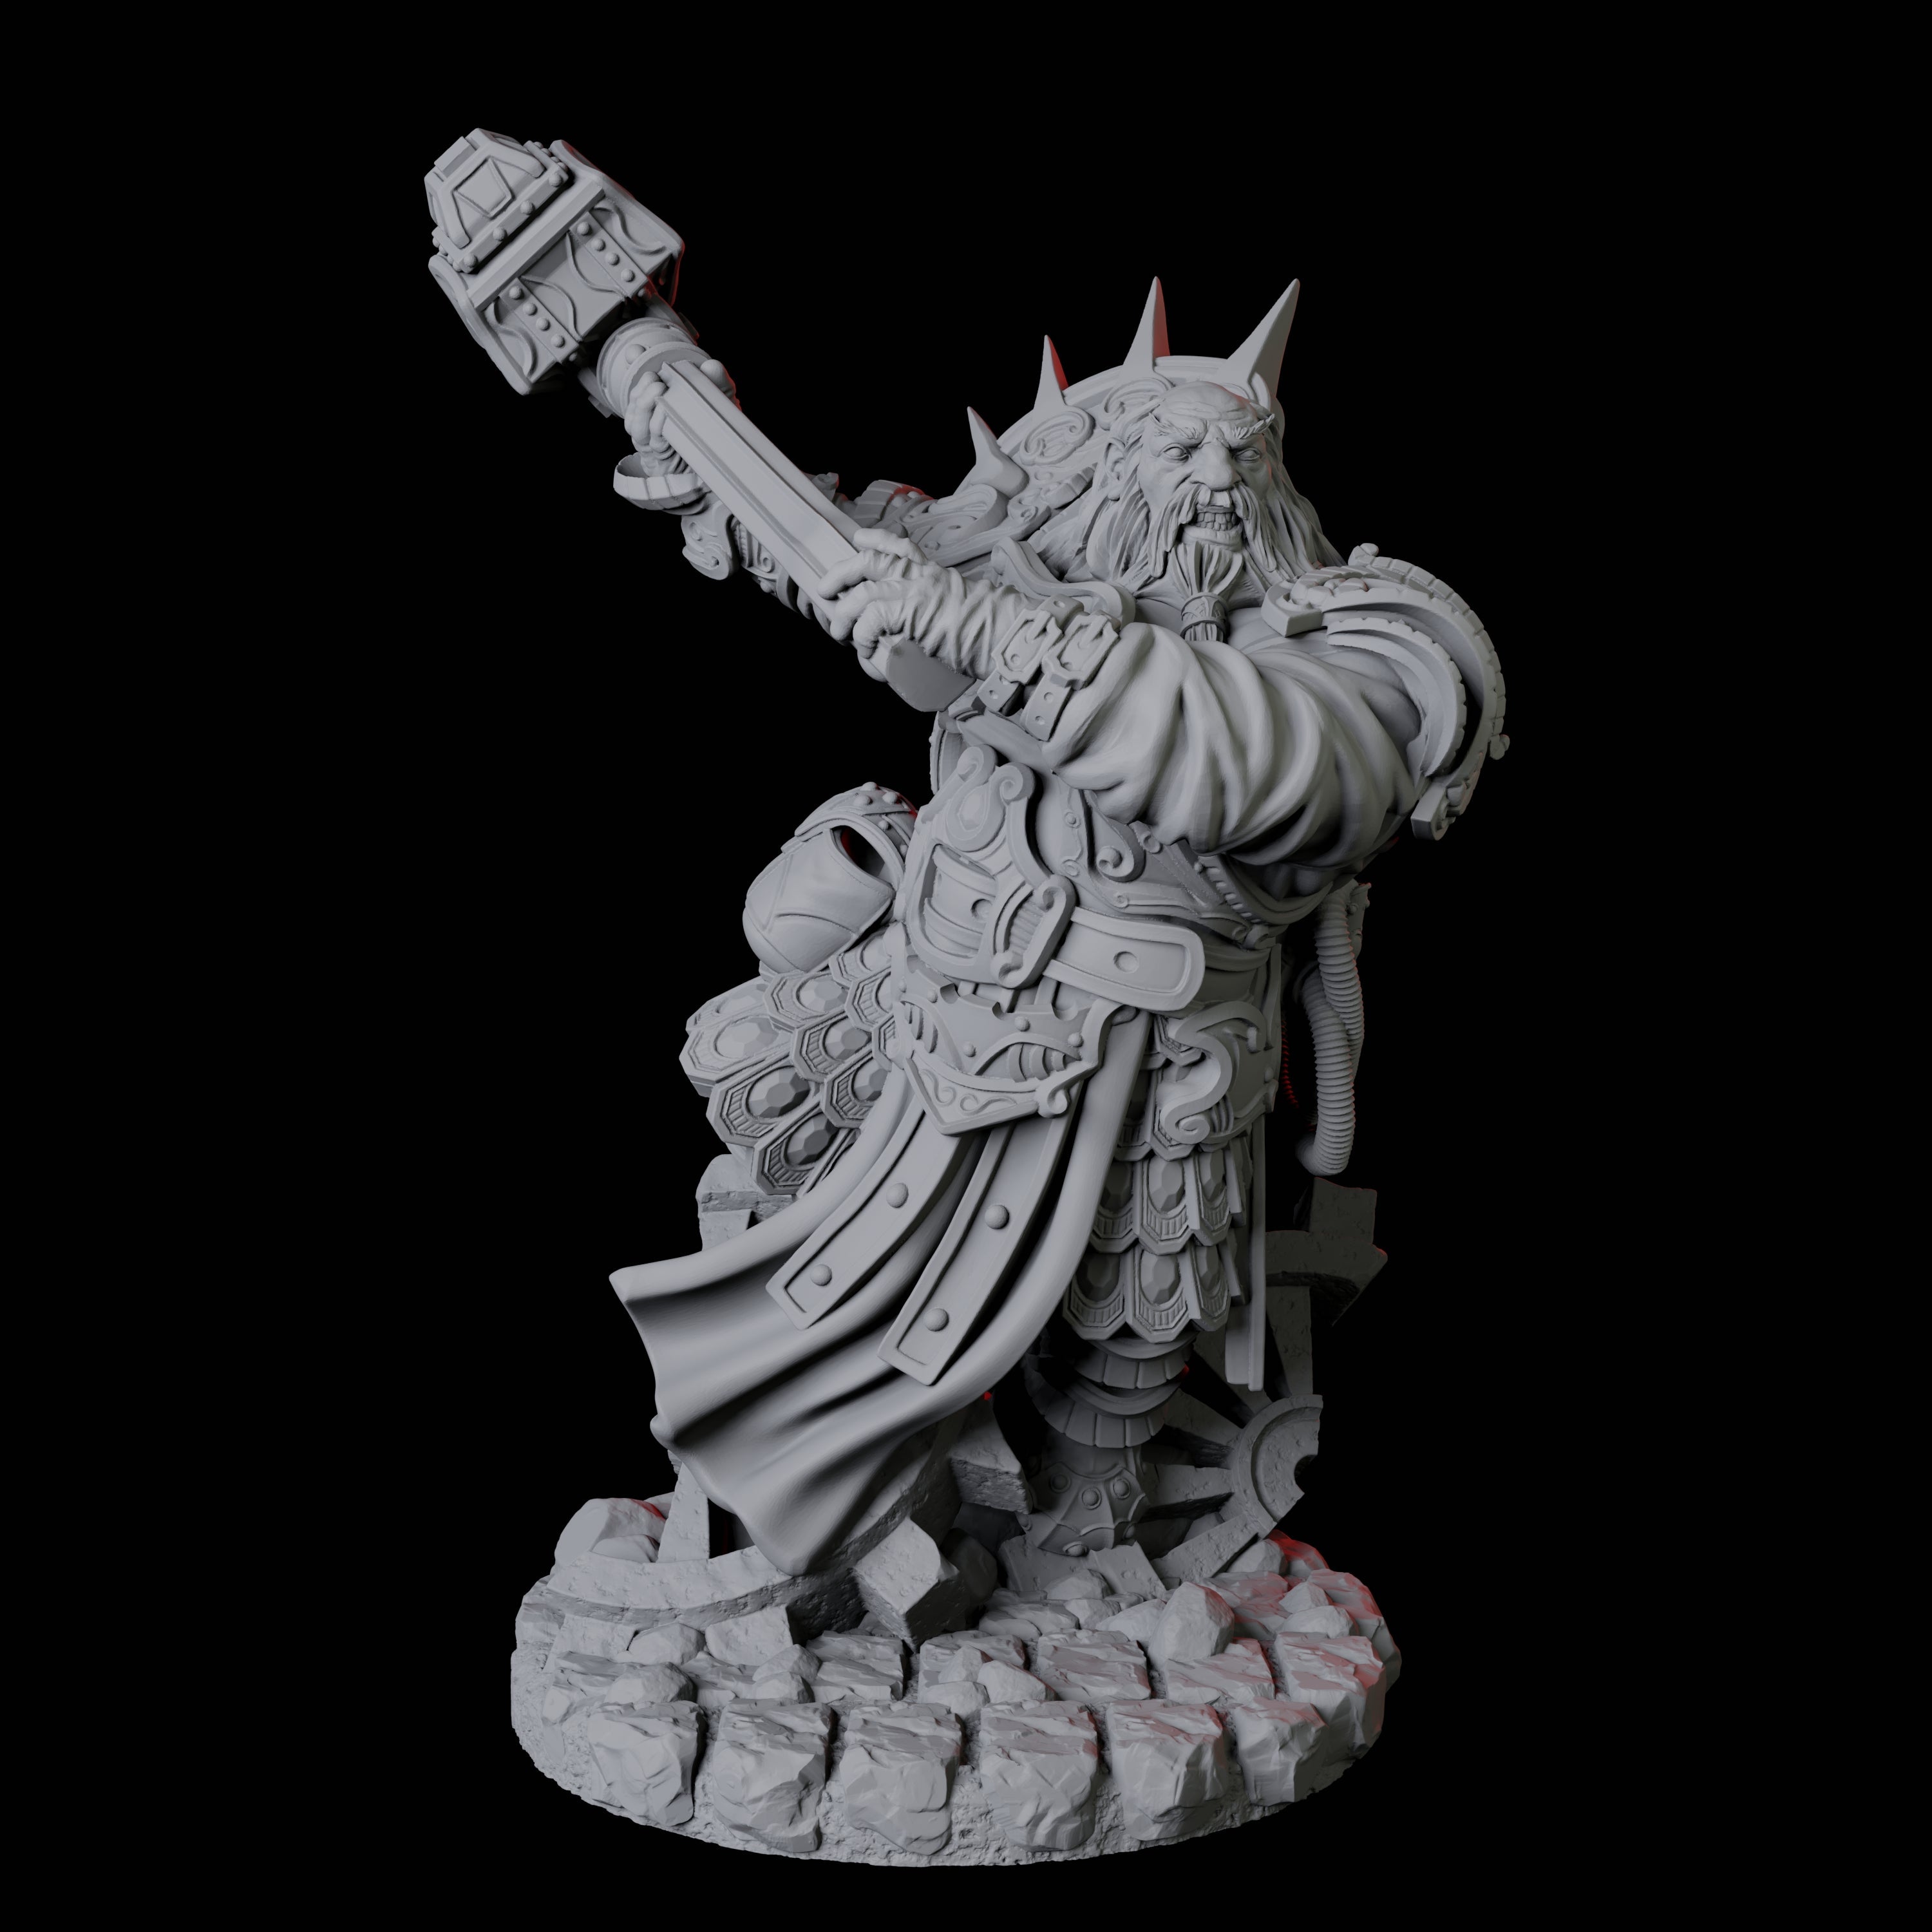 Four Dwarf Artificer Engineers Miniature for Dungeons and Dragons, Pathfinder or other TTRPGs